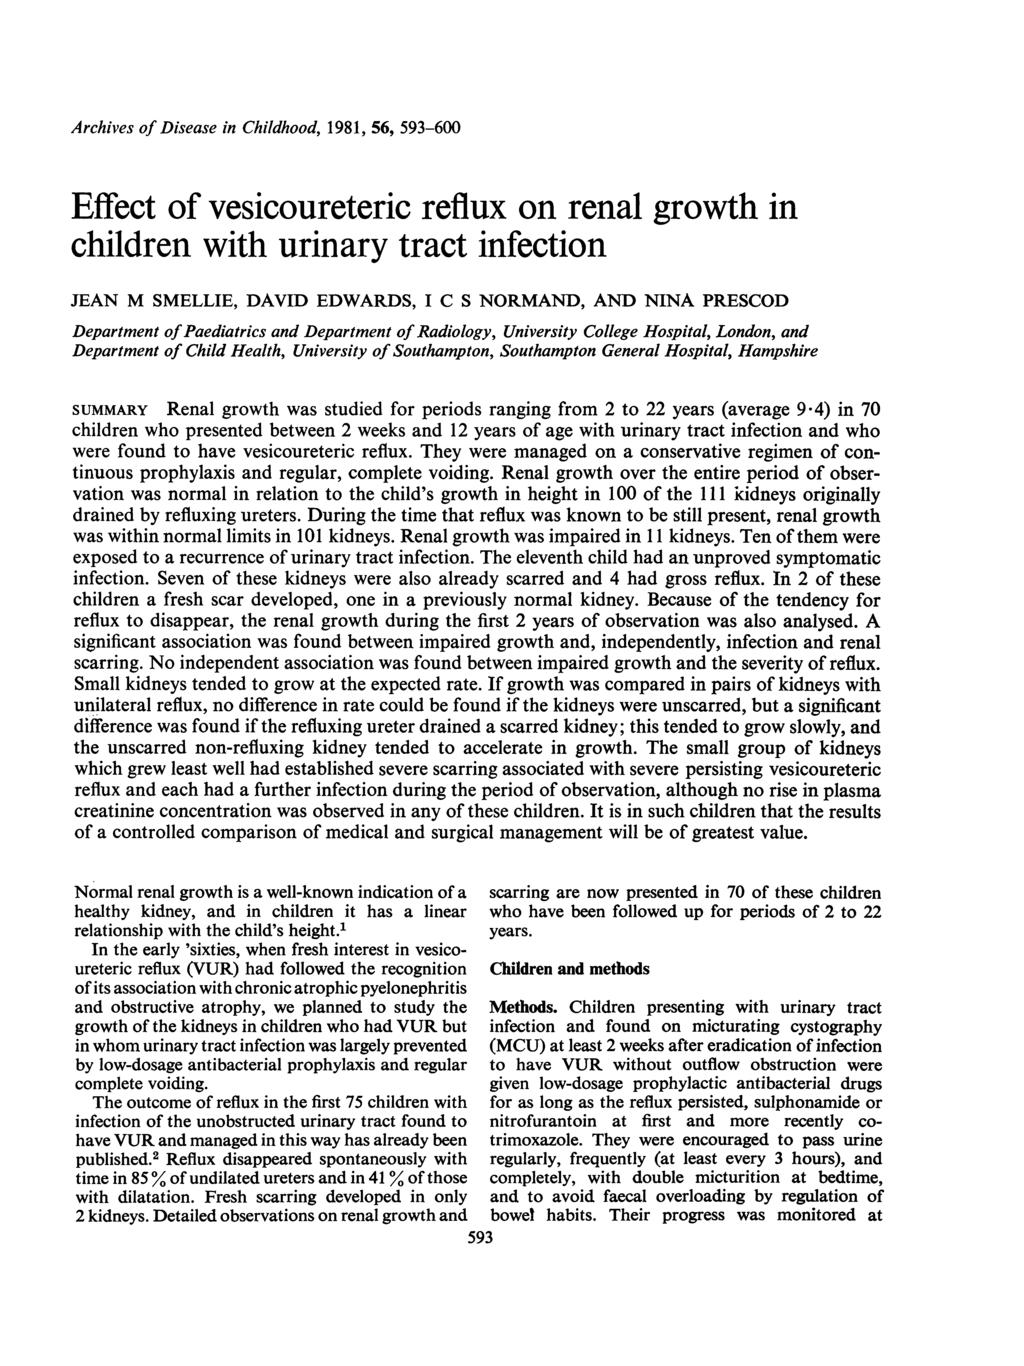 Archives of Disease in Childhood, 1981, 56, 593-600 Effect of vesicoureteric reflux on renal growth in children with urinary tract infection JEAN M SMELLIE, DAVID EDWARDS, I C S NORMAND, AND NINA